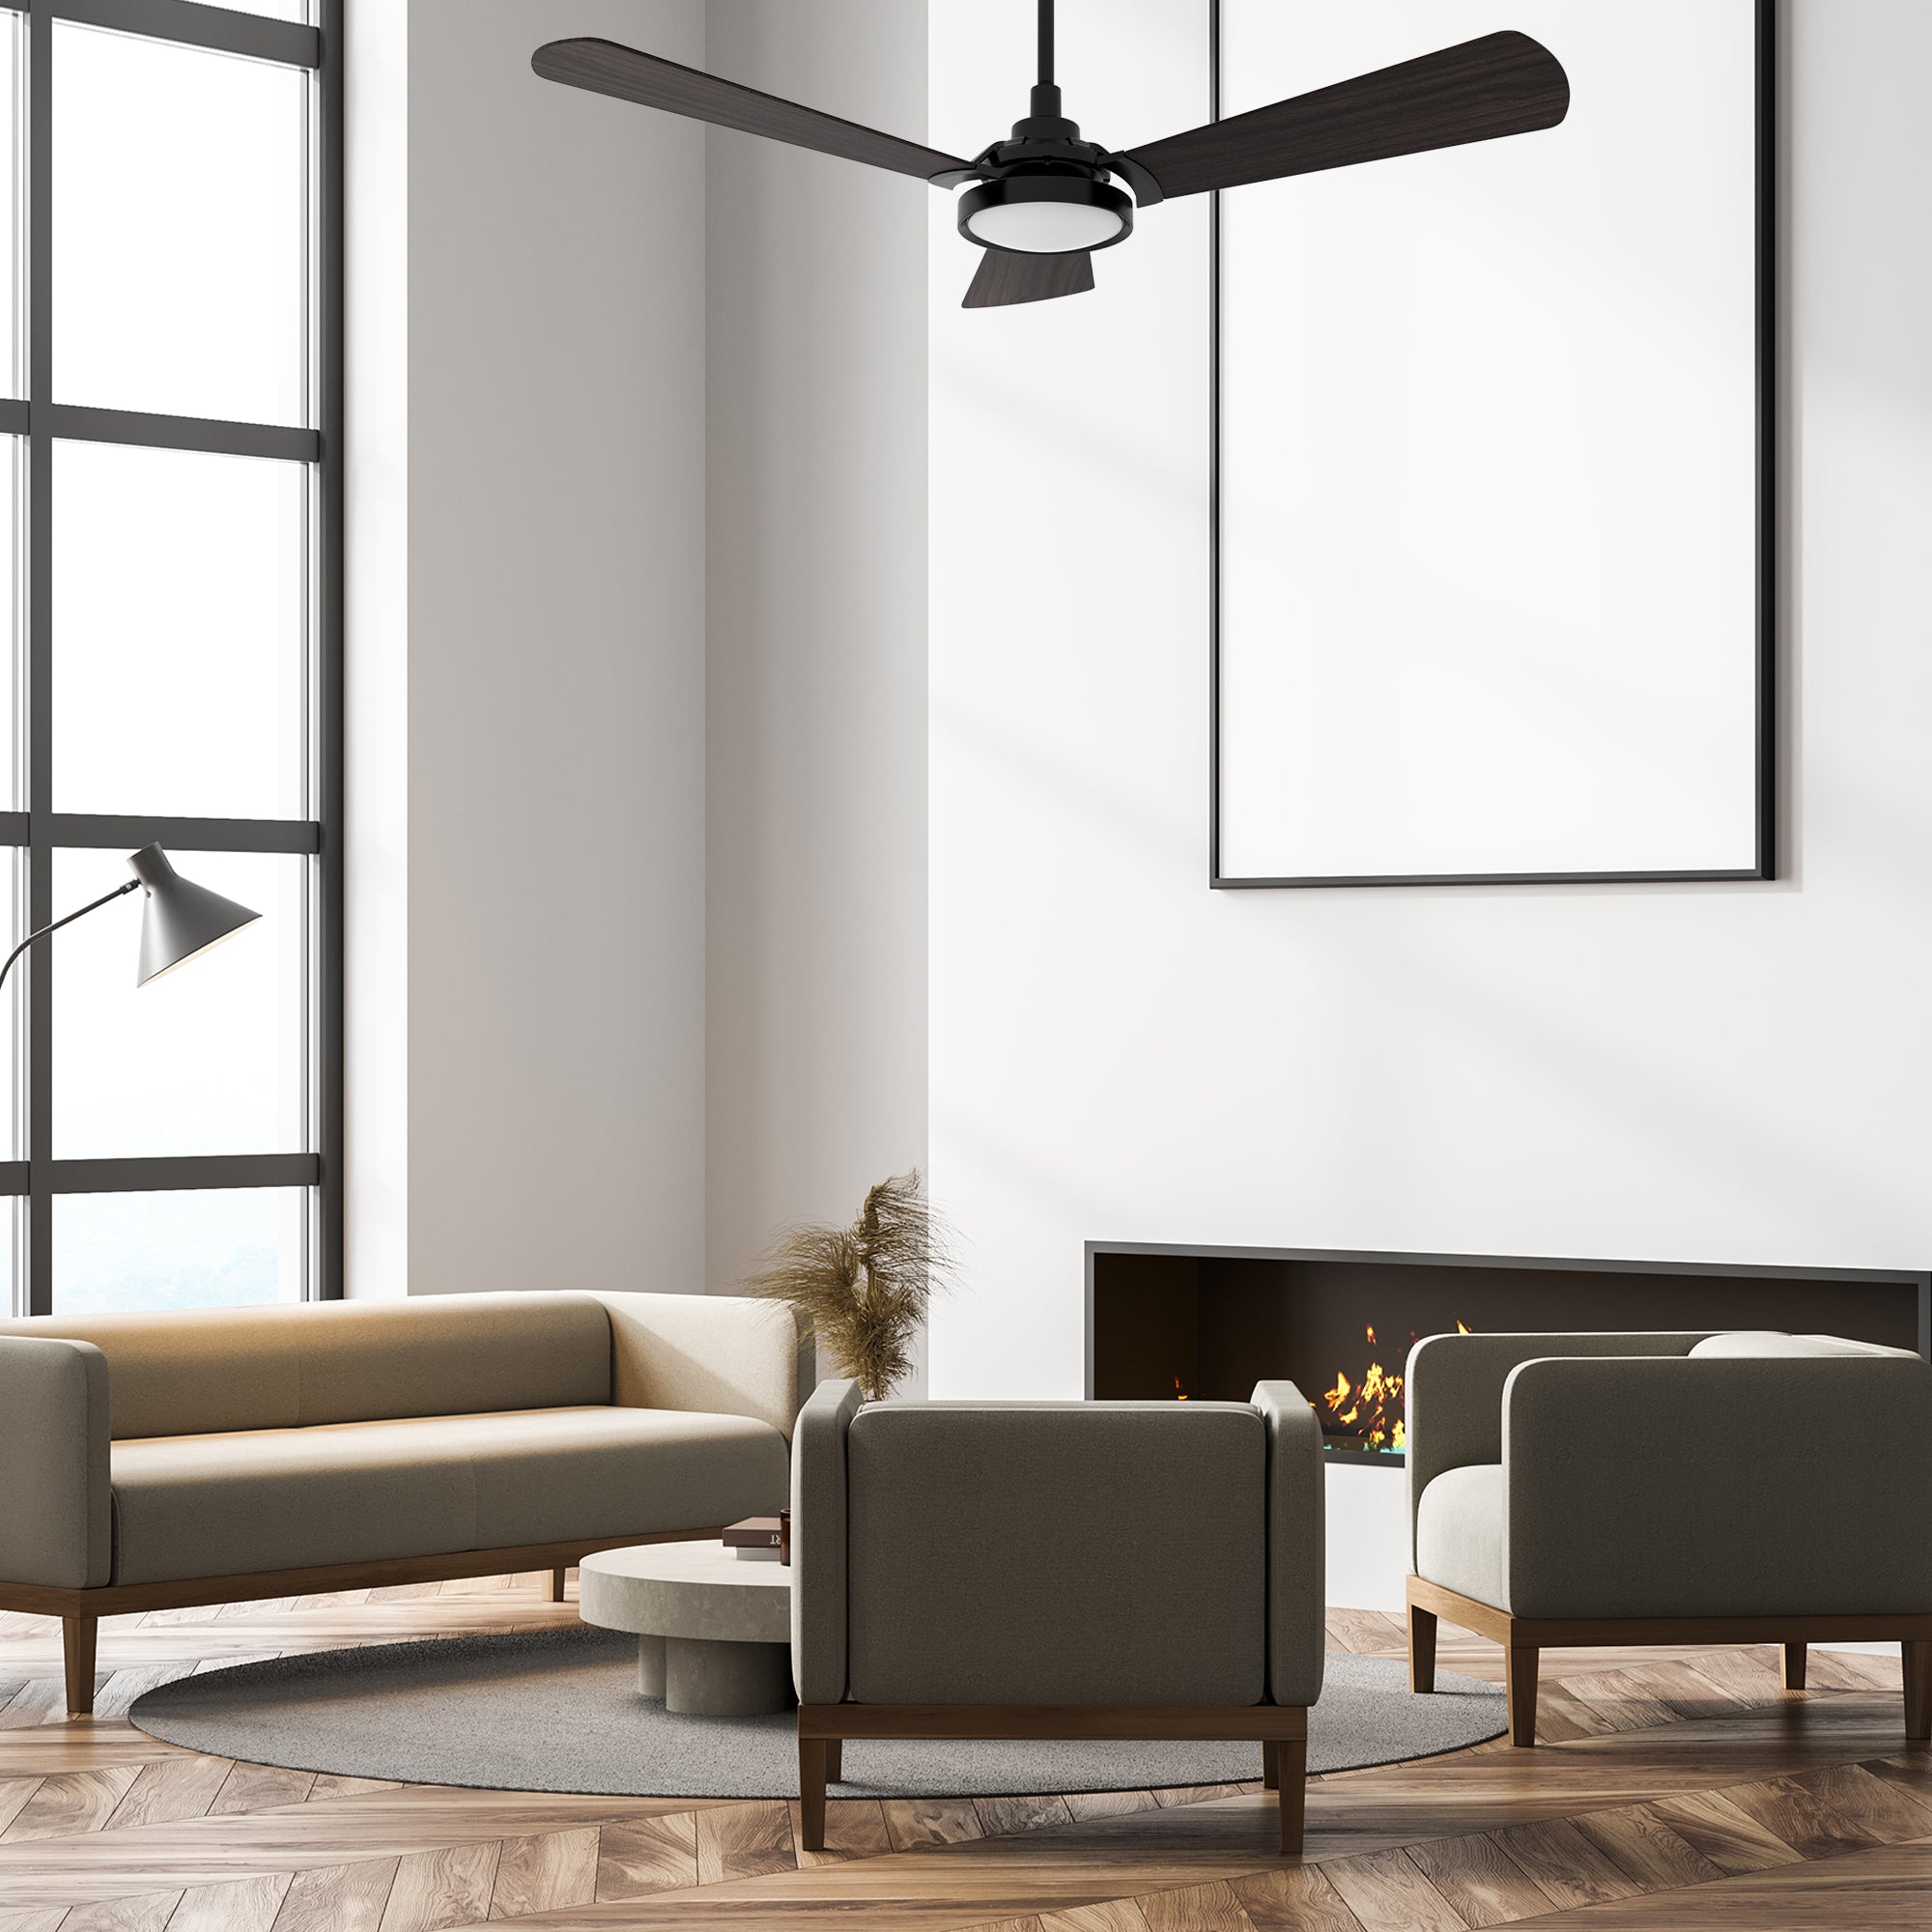 This Smafan Veter 56'' smart ceiling fan keeps your space cool, bright, and stylish. It is a soft modern masterpiece perfect for your large indoor living spaces. This Wifi smart ceiling fan is a simplicity designing with White finish, use elegant Plywood blades, Glass shade and has an integrated 4000K LED daylight. The fan features Remote control, Wi-Fi apps, Siri Shortcut and Voice control technology (compatible with Amazon Alexa and Google Home Assistant ) to set fan preferences.#color_Dark-Wood